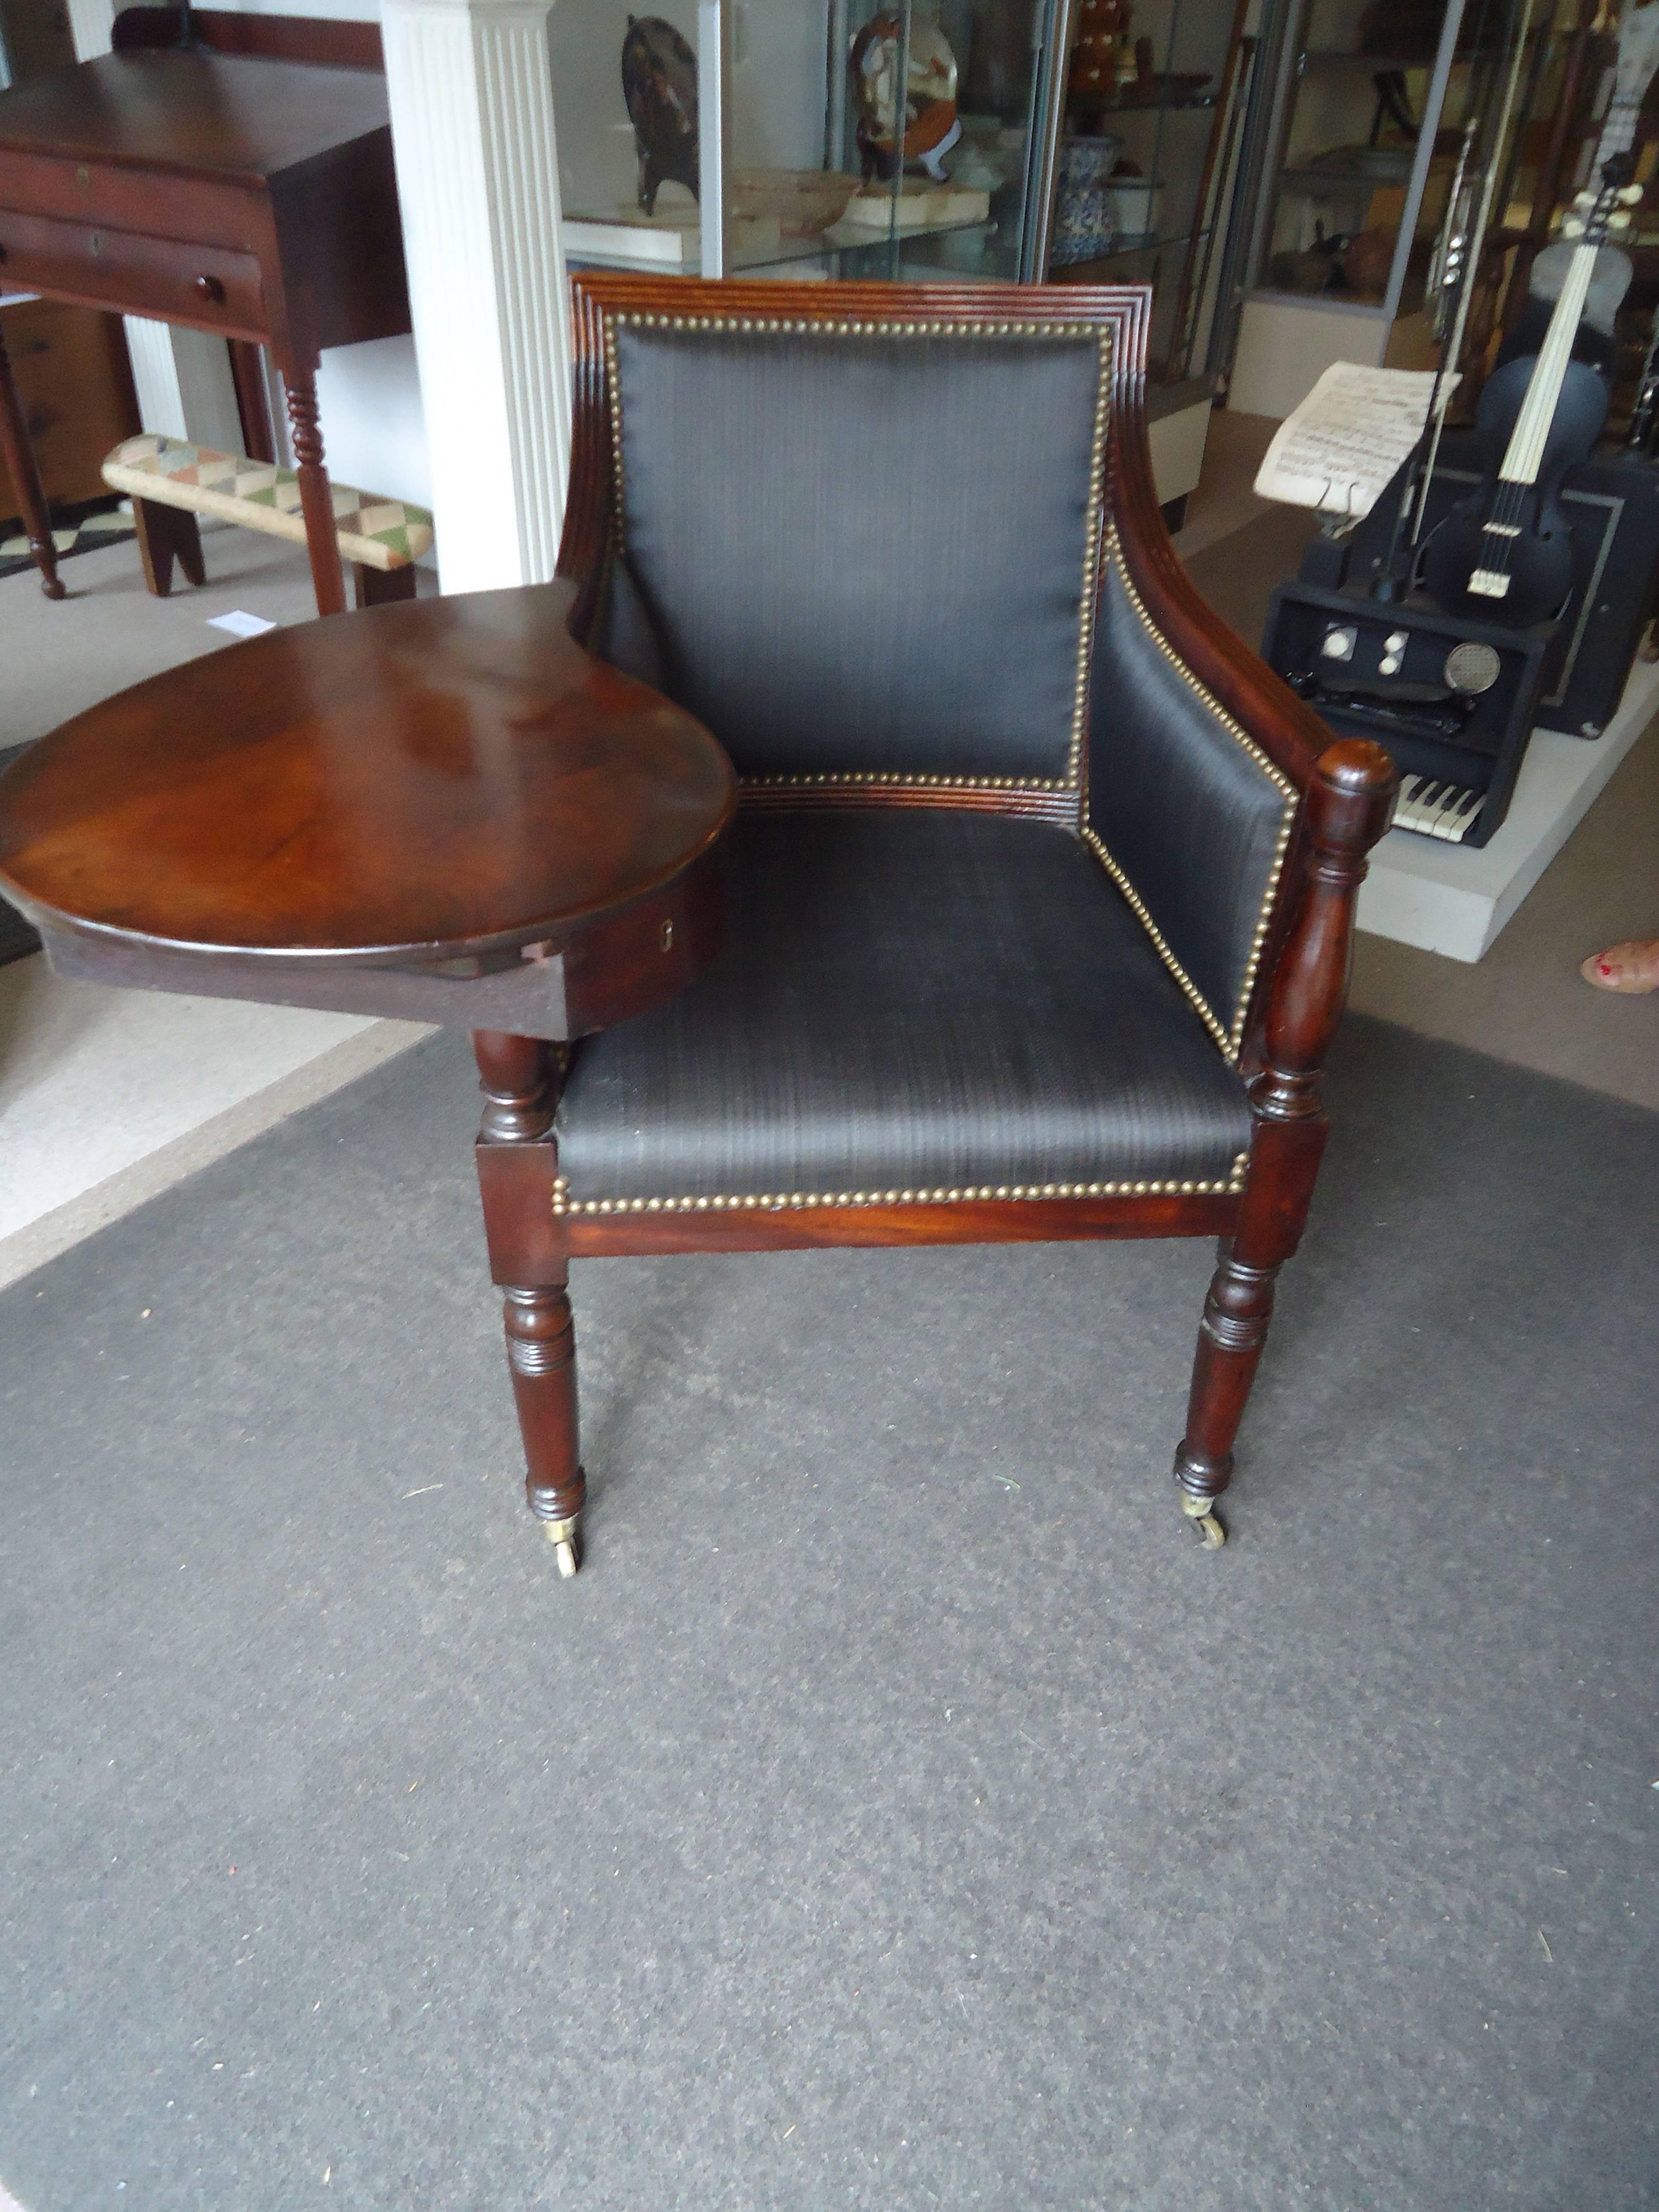 Very unusual Federal writing chair having a reeded frame upholstered in black horsehair and tack trim, with a large writing surface on the right and a sliding drawer underneath fitted with compartments for inkwells, all resting on turned legs with